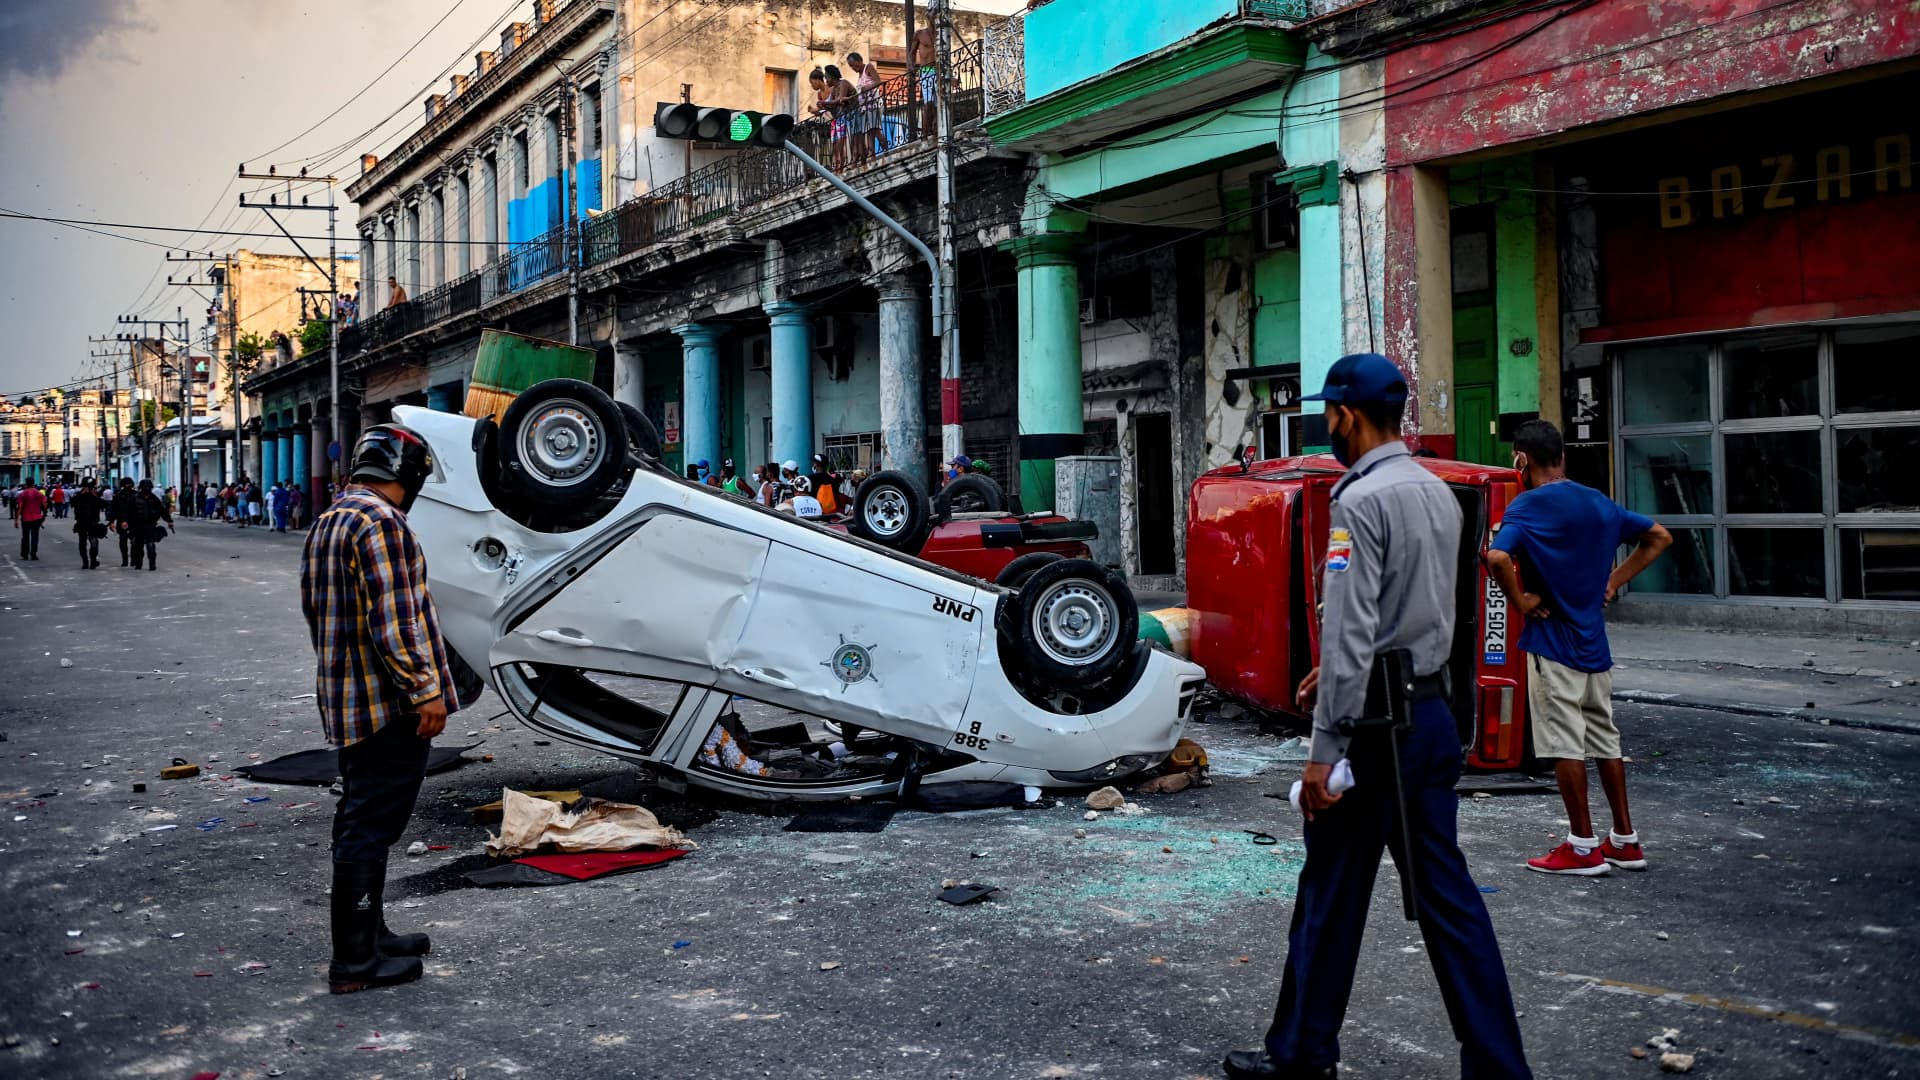 Police cars are seen overturned in the street in the framework of a demonstration against Cuban President Miguel Diaz-Canel in Havana, on July 11, 2021.